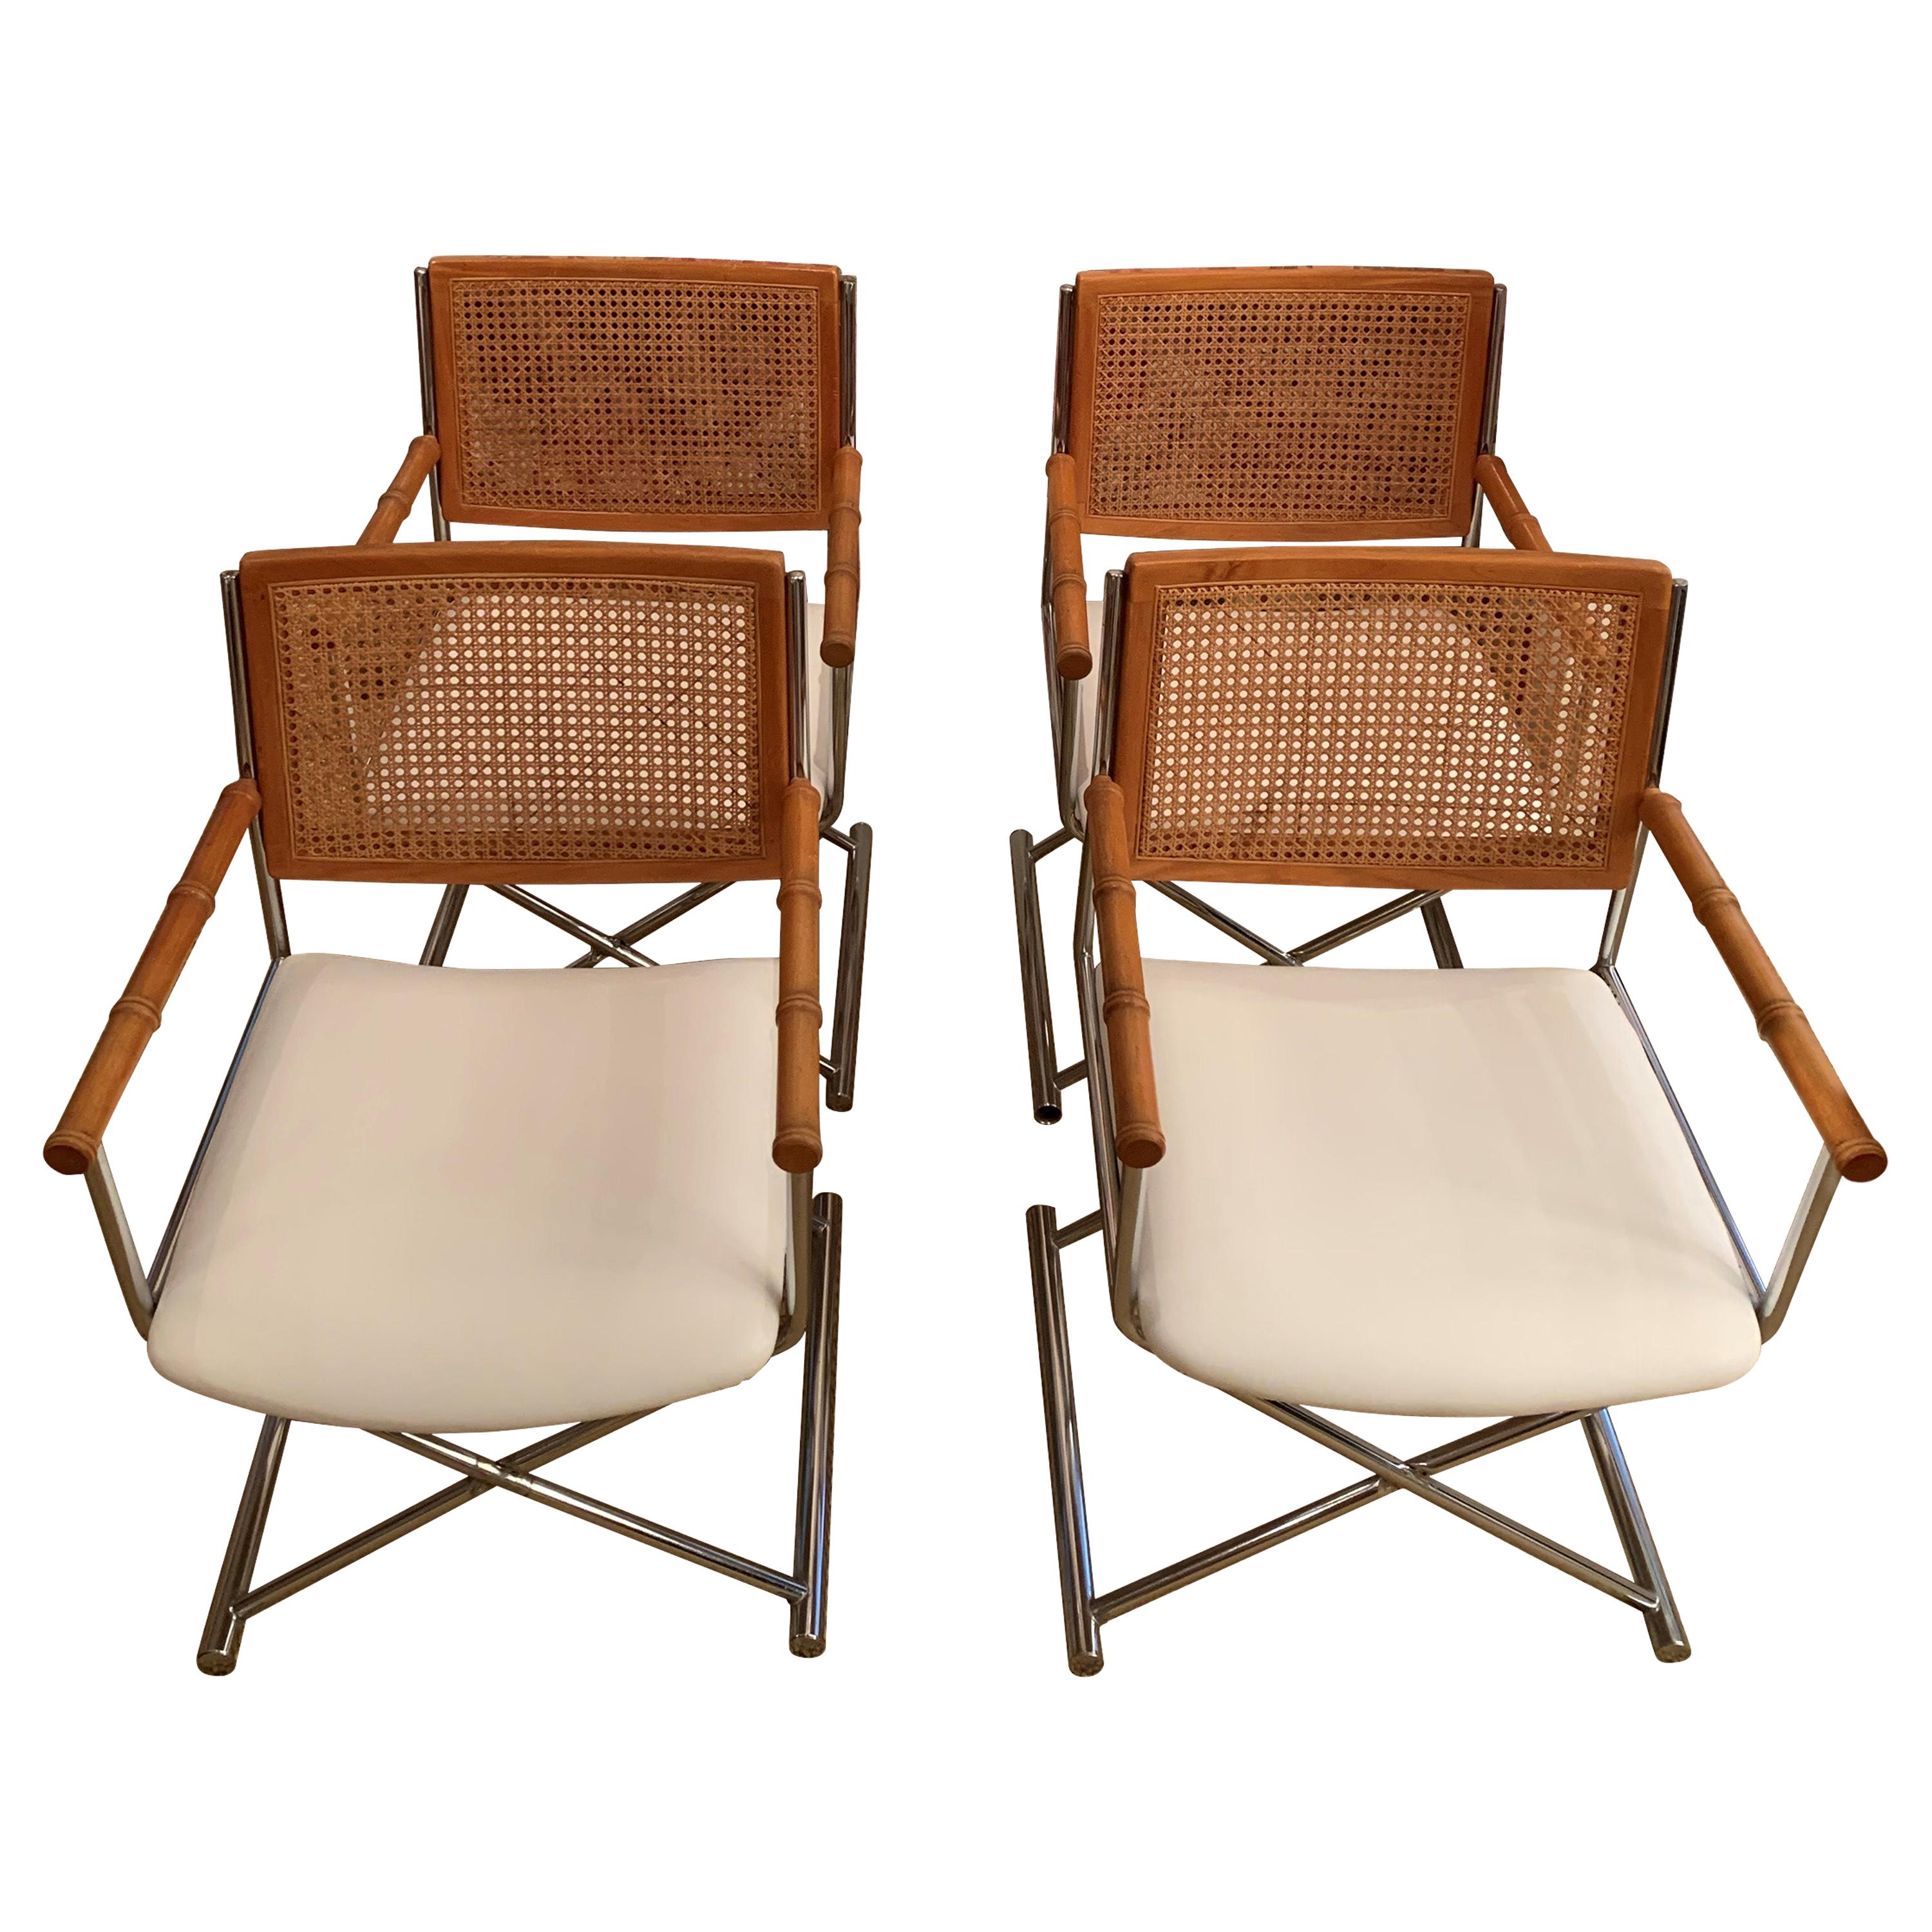 20th Century Faux Bamboo Director Chrome and Cane Chairs